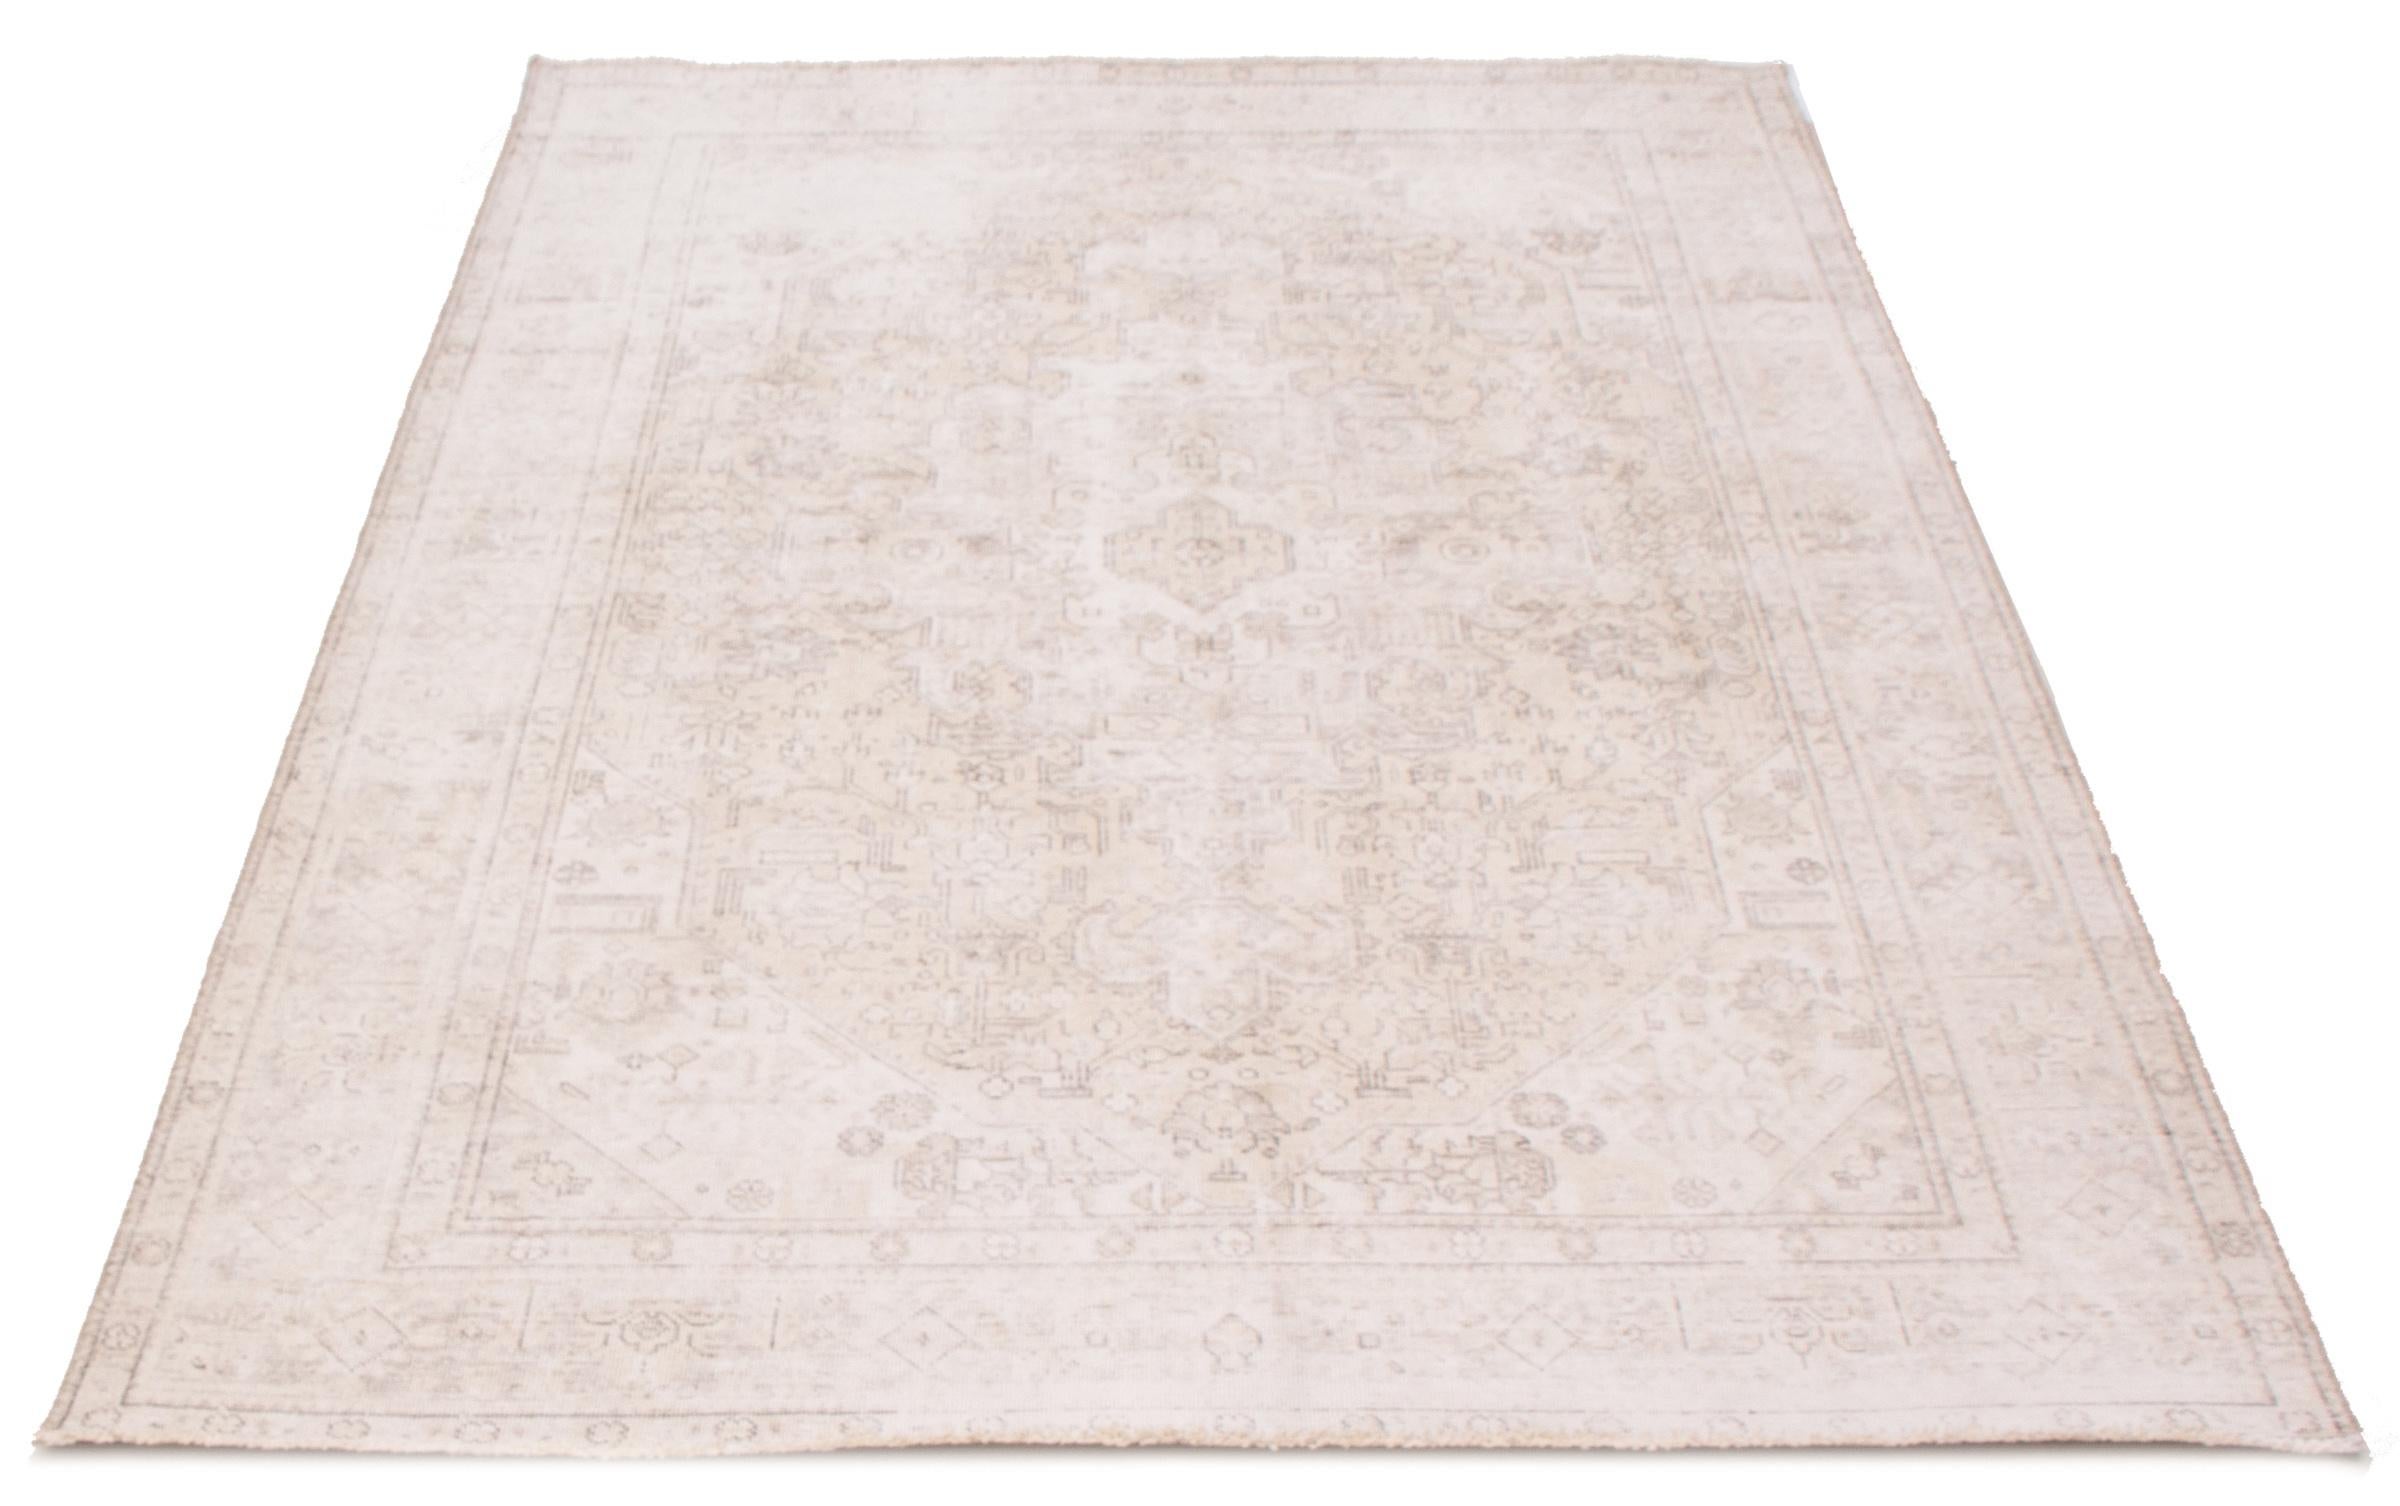 Hand-Woven Hand-knotted Vintage Pastel Wool Persian Tabriz Carpet, 6’ x 9’ For Sale